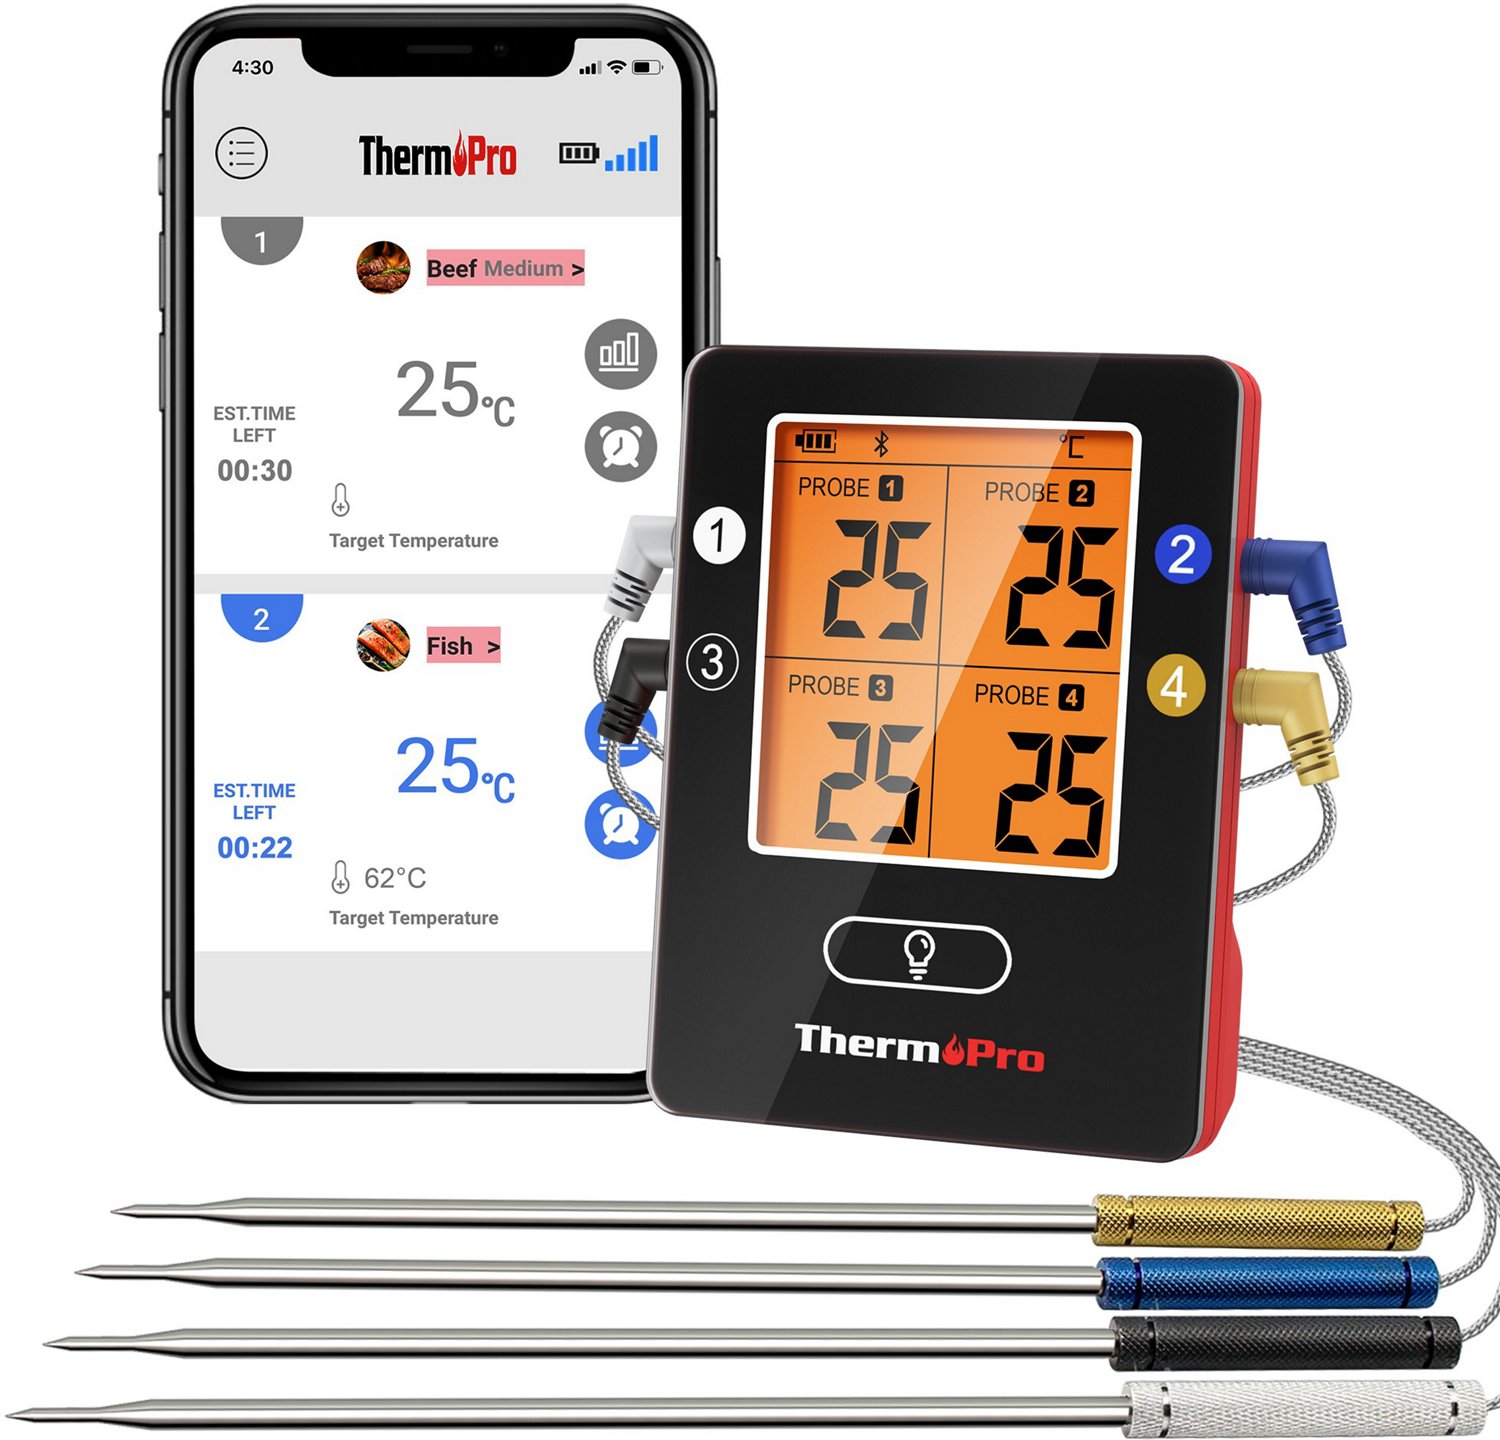 ThermoPro Launches New Innovative Meat Thermometer, the Lightning